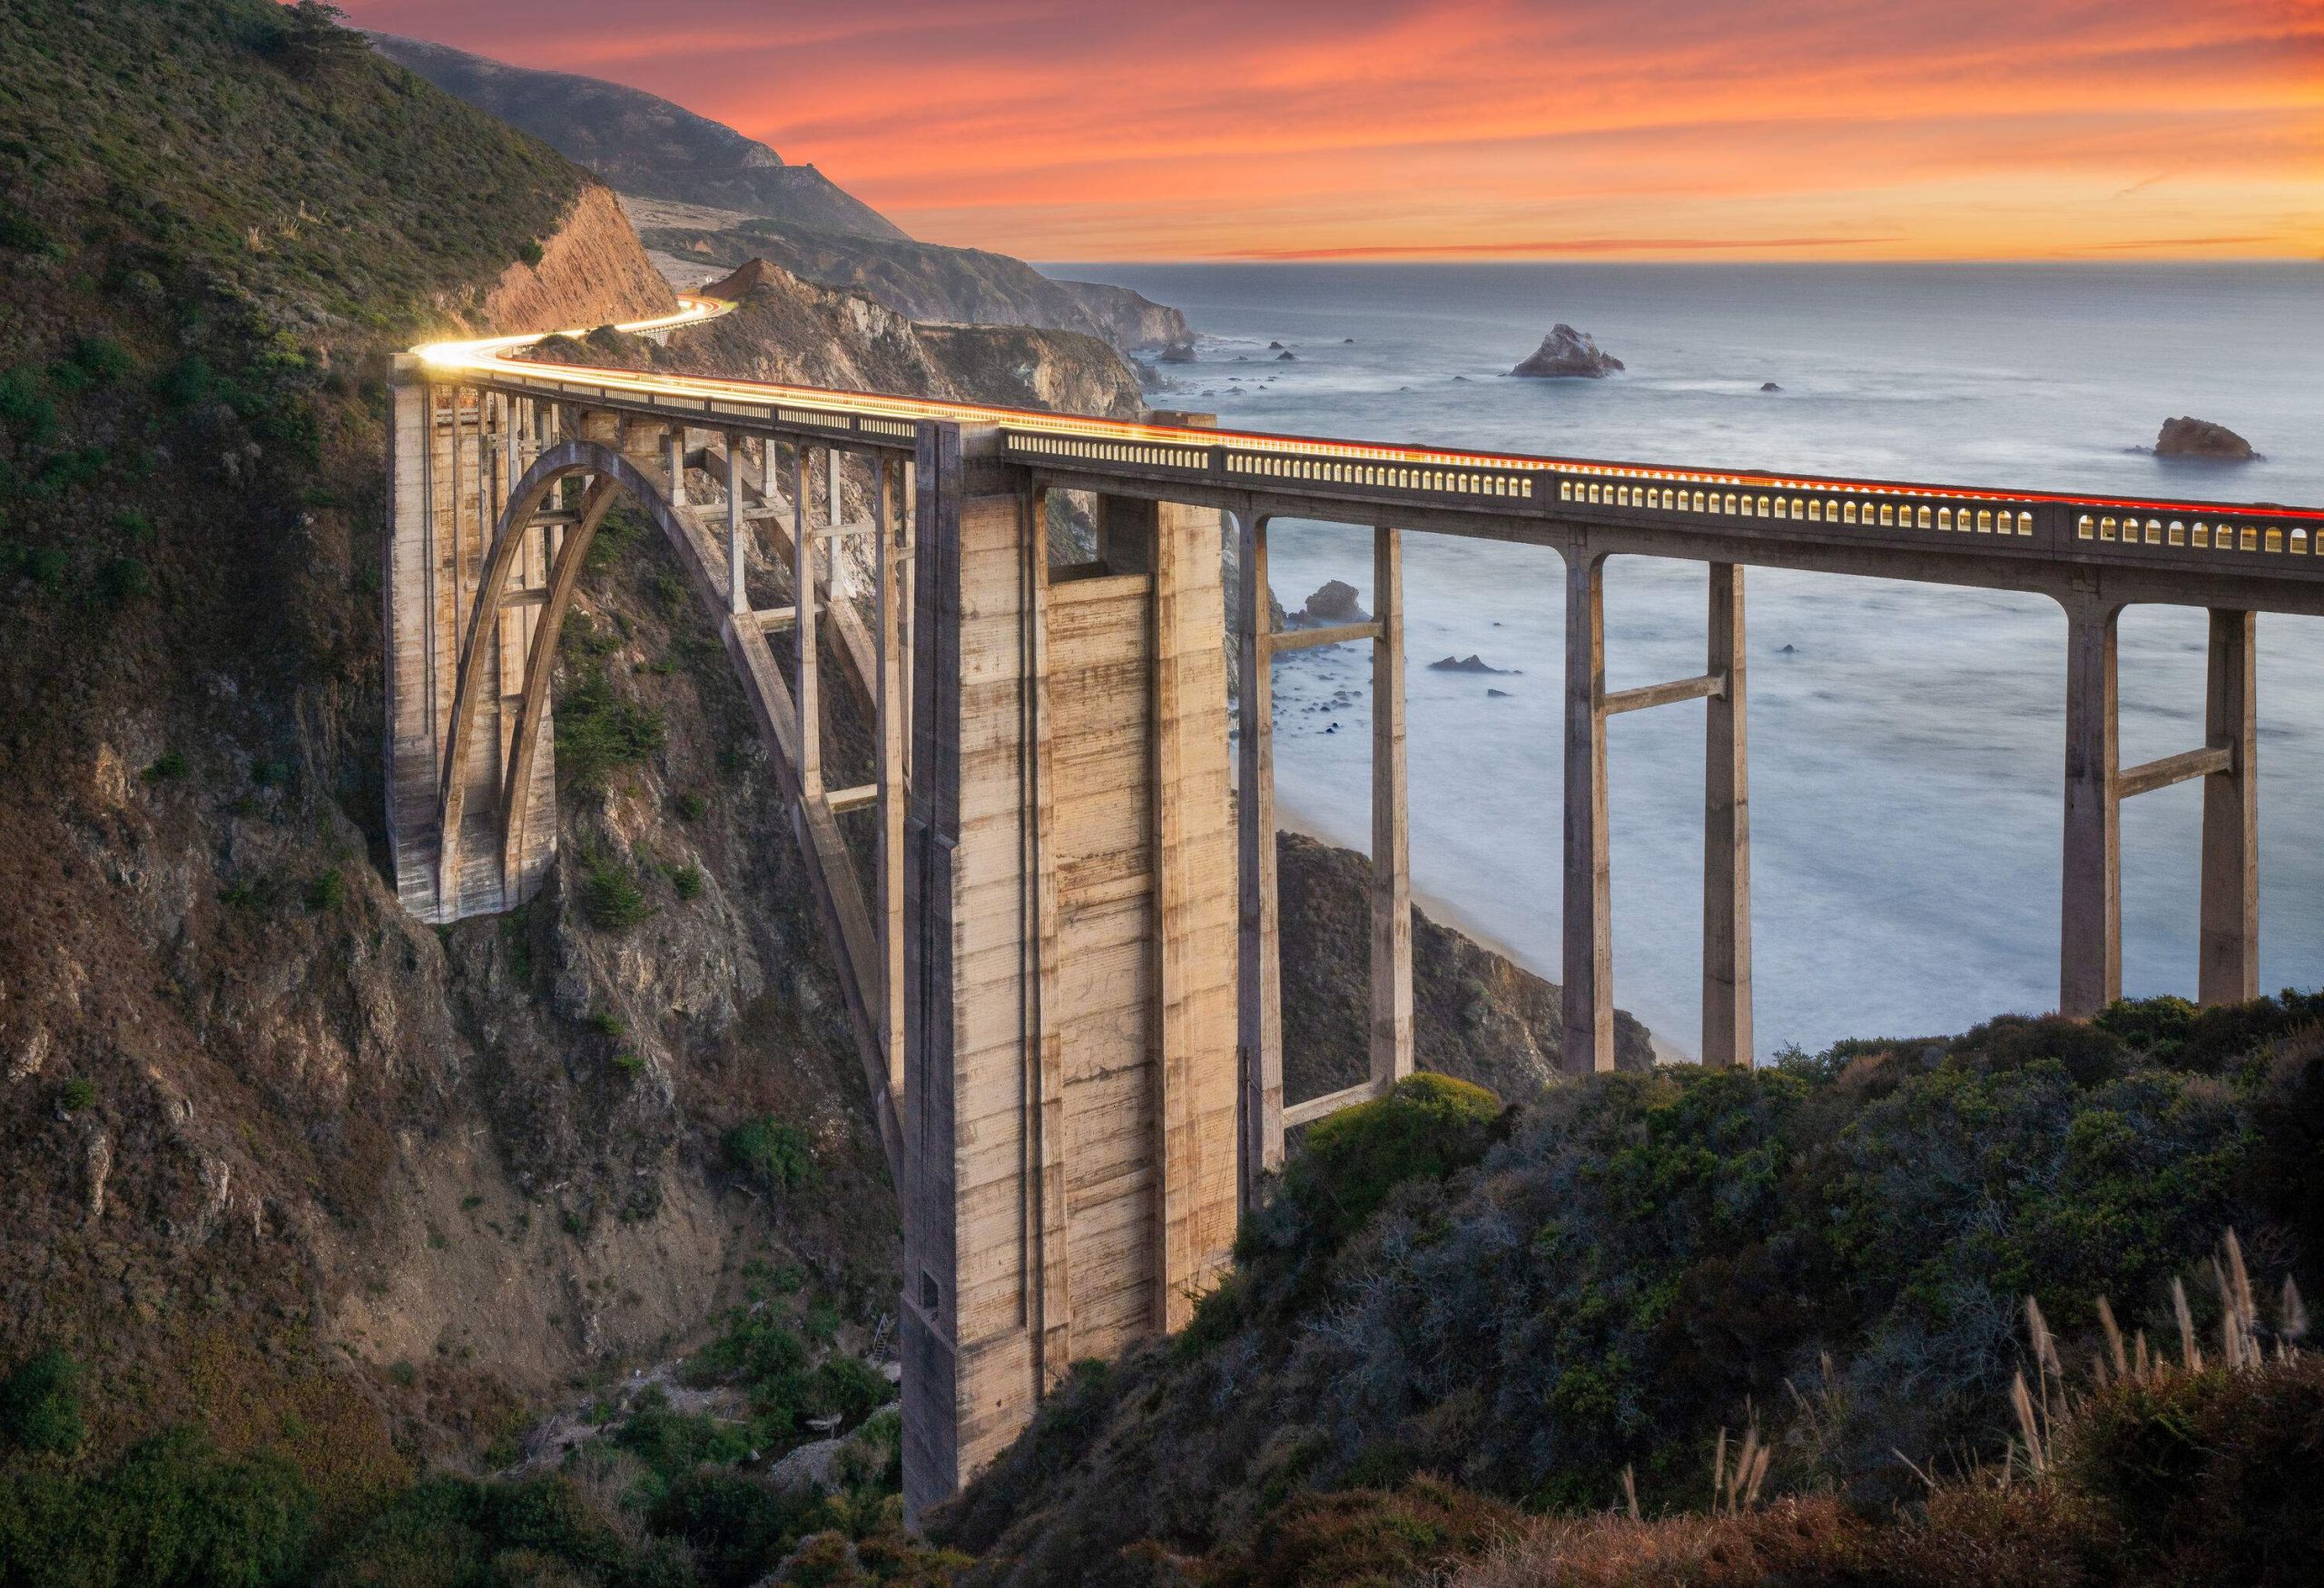 A tall, open-spandrel arch bridge between steep and crumbling cliffs on the coastline on a dramatic sunset.